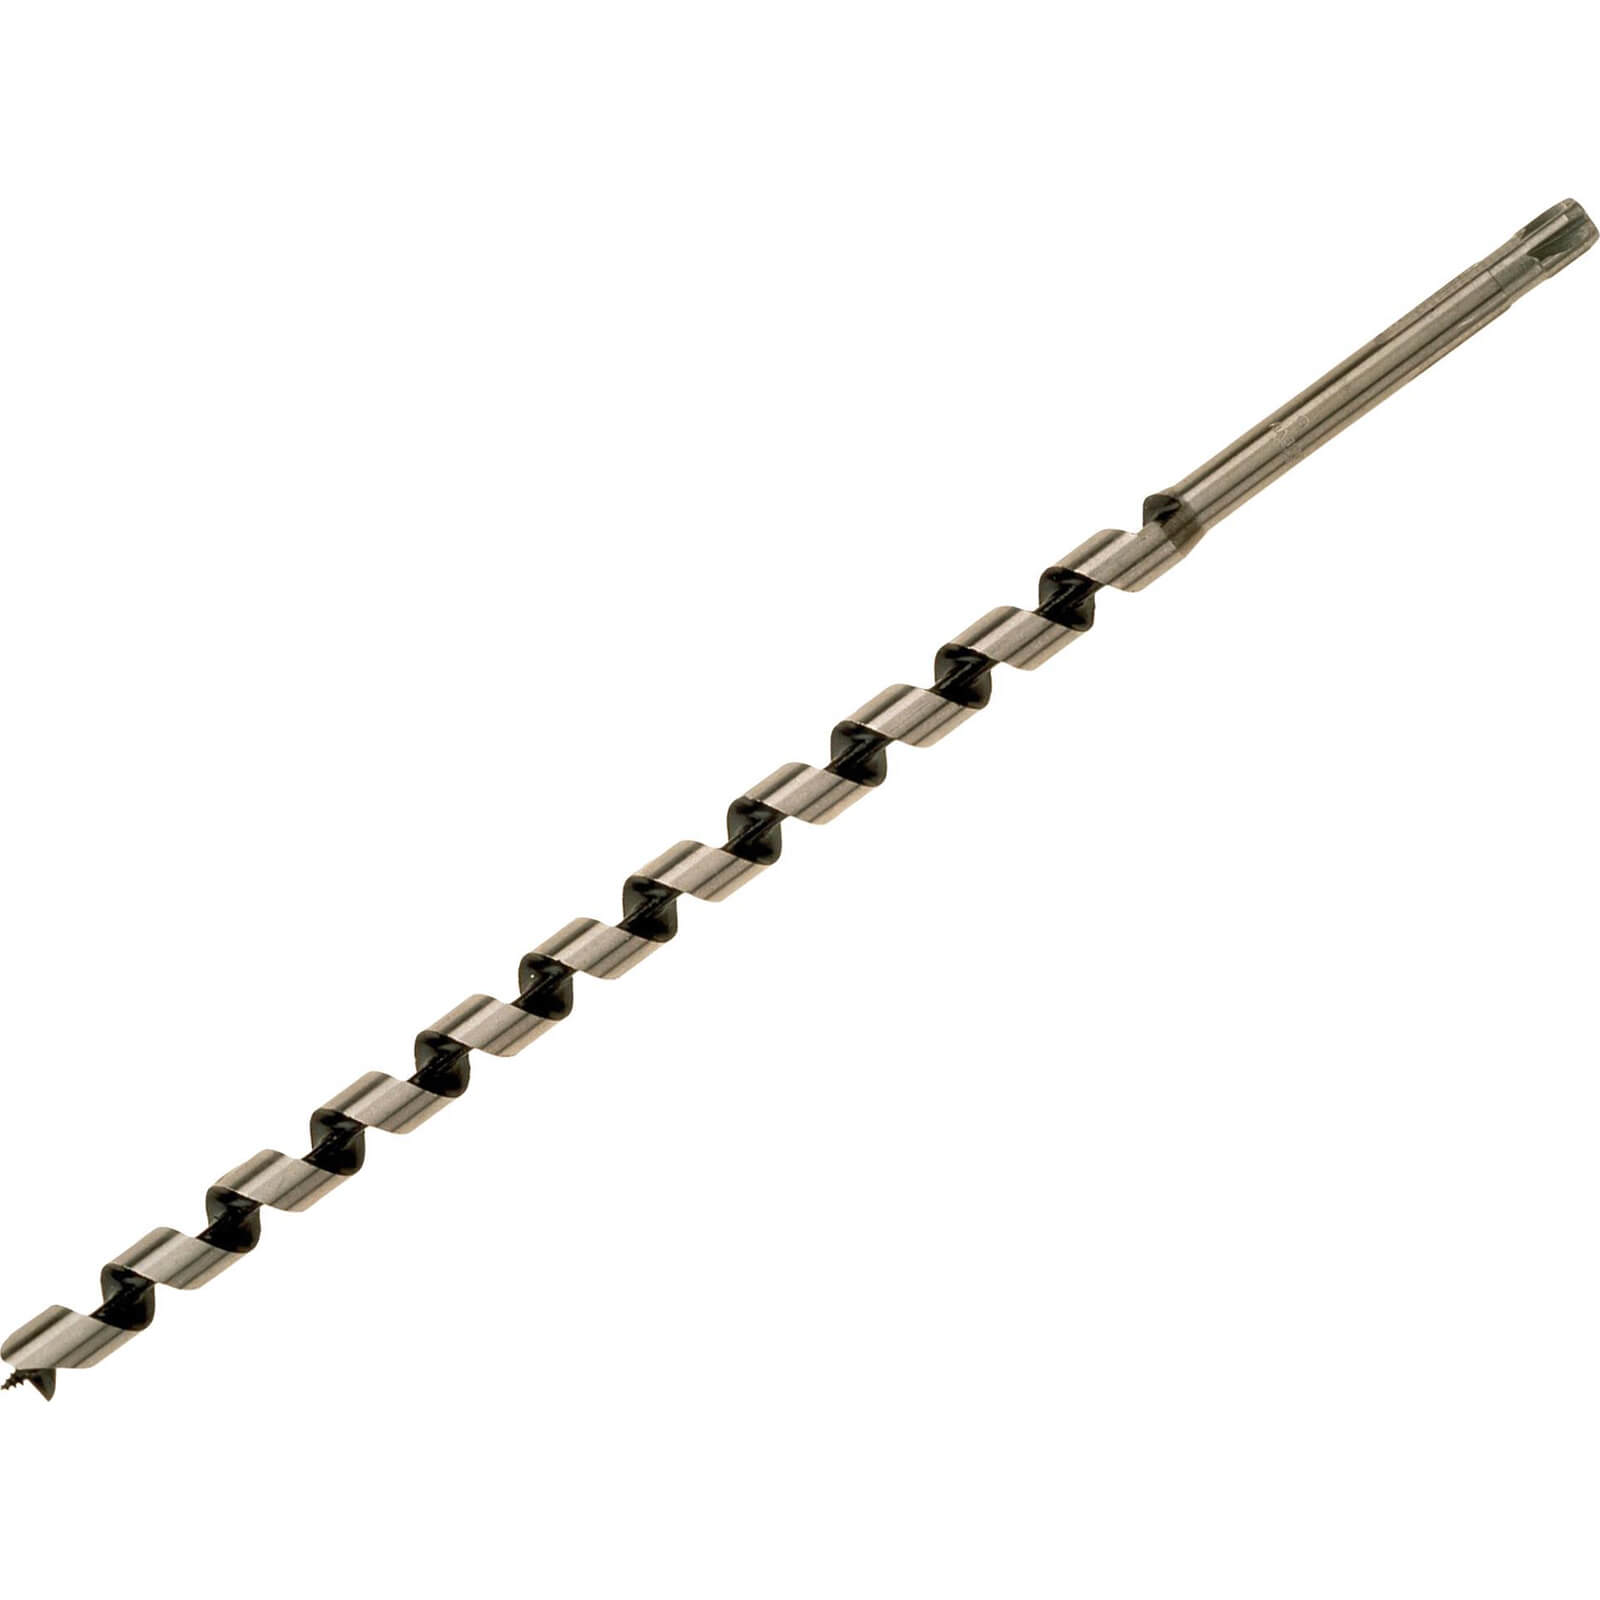 Photo of Bahco 9627 Series Long Combination Auger Drill Bit 12mm 460mm